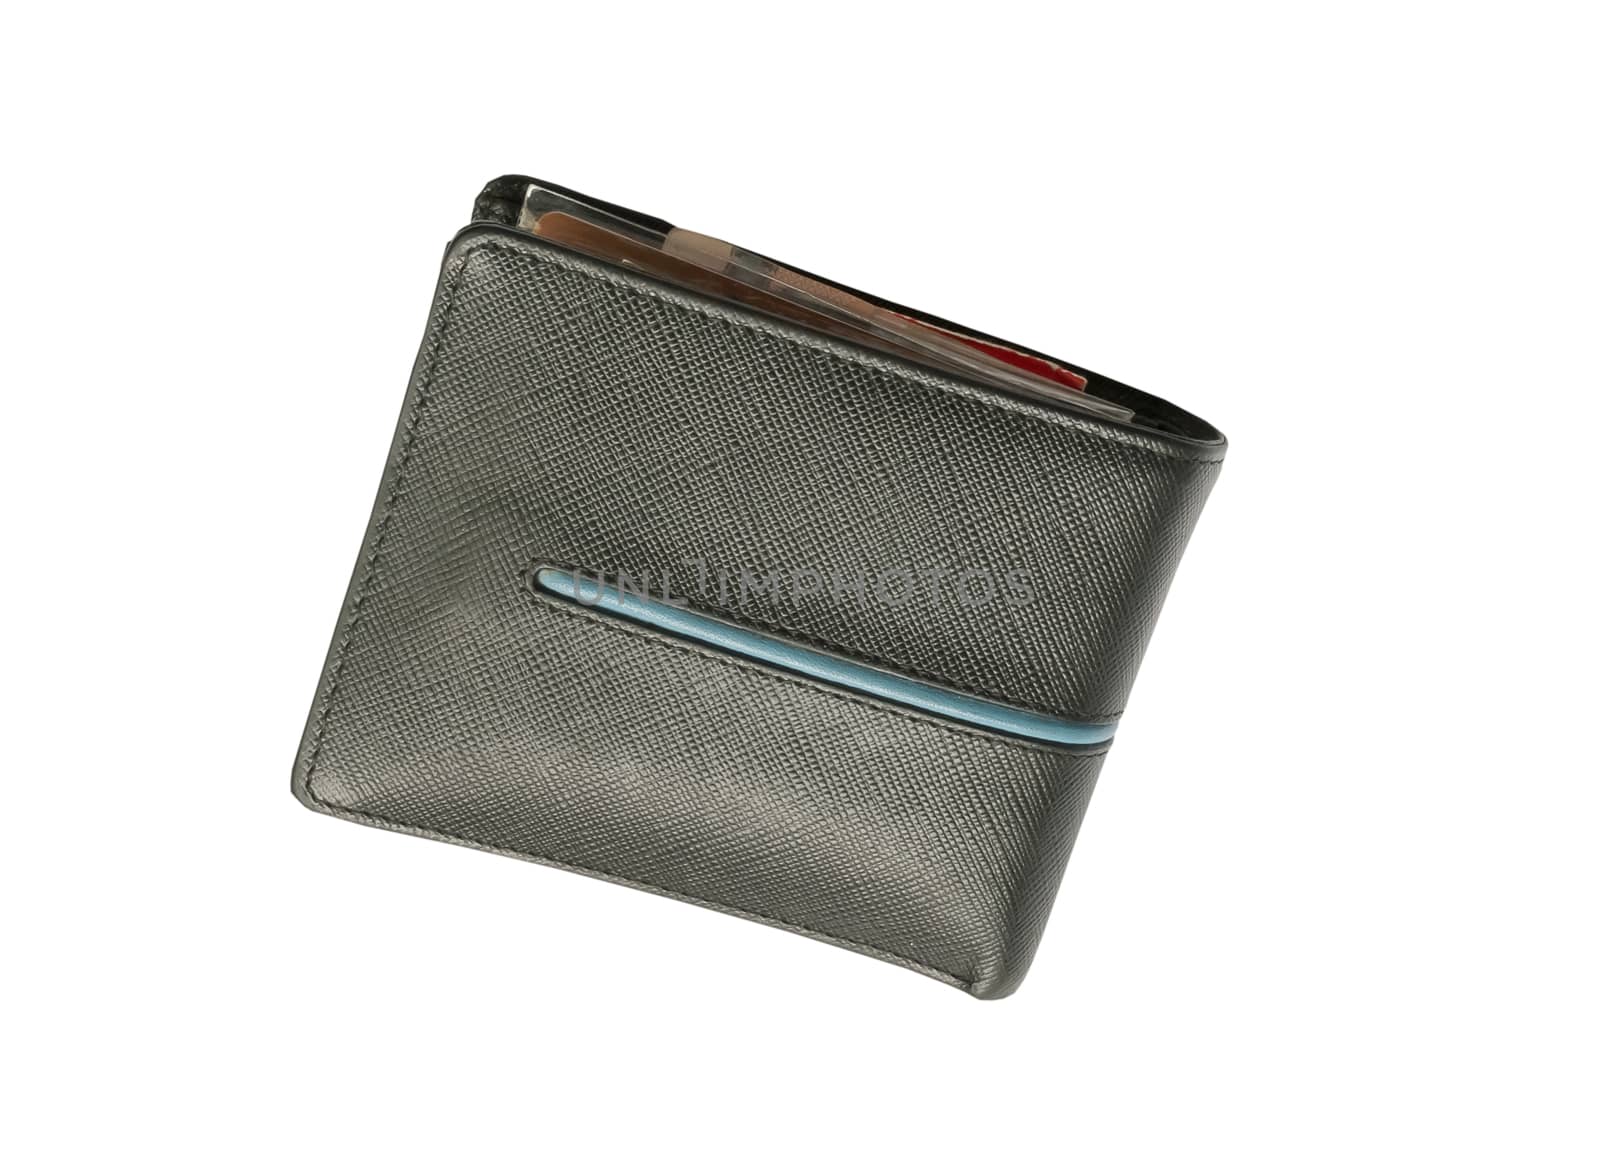 men's leather wallet isolated on white background